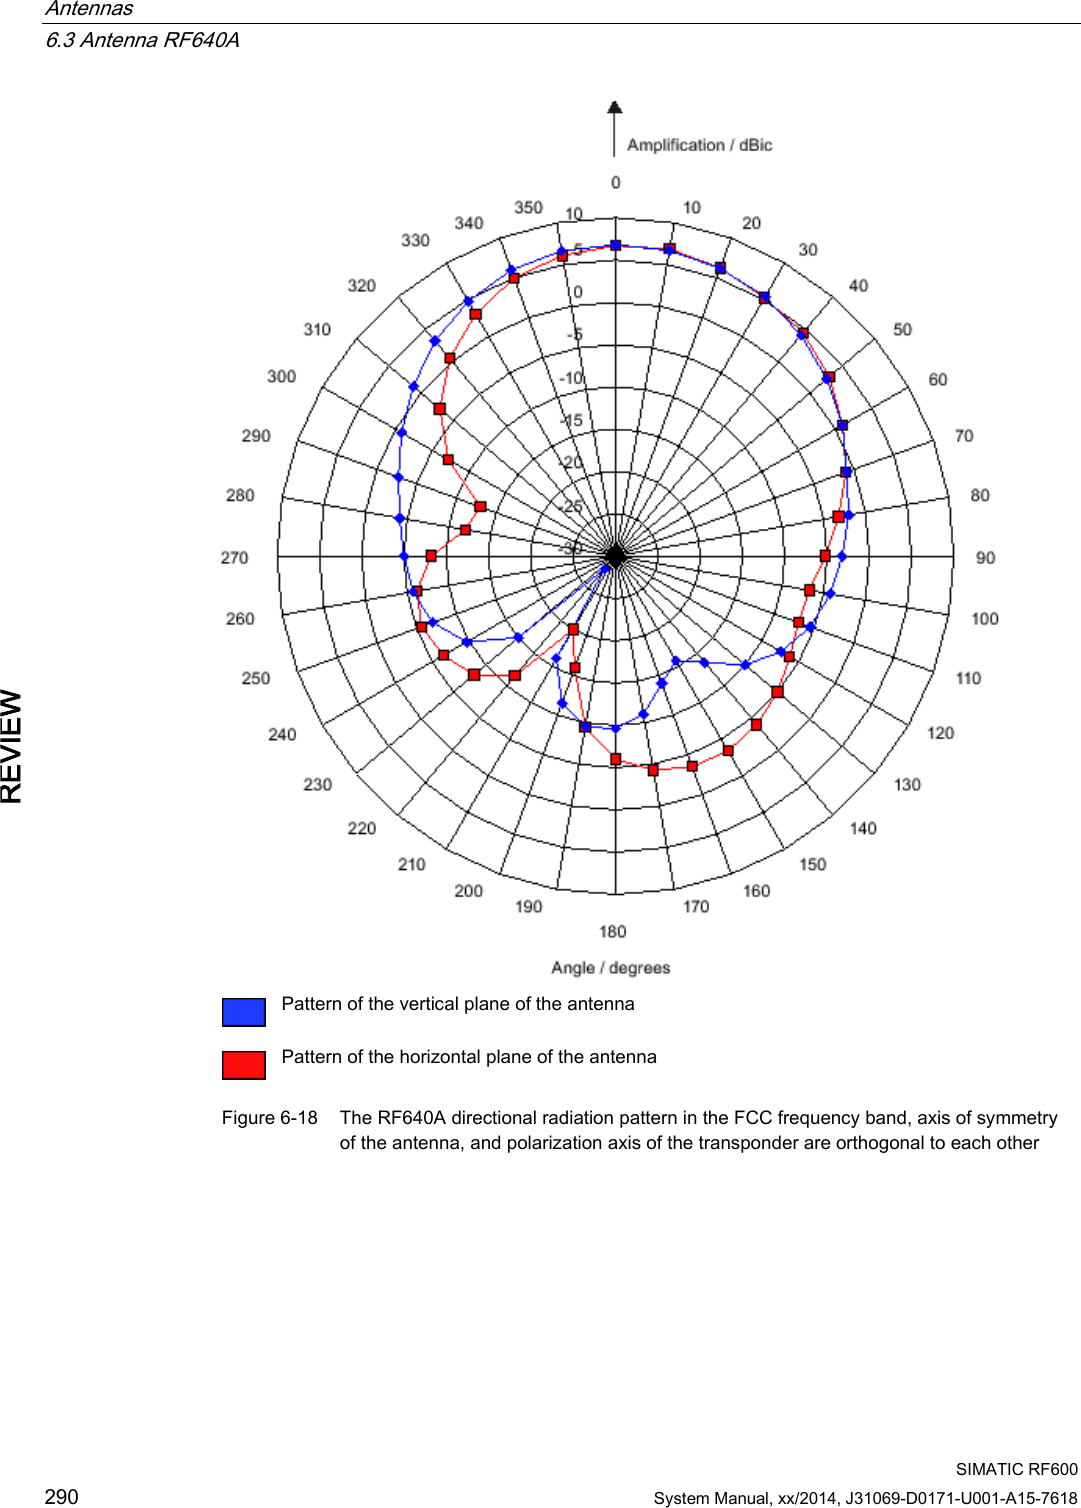 Antennas   6.3 Antenna RF640A  SIMATIC RF600 290 System Manual, xx/2014, J31069-D0171-U001-A15-7618 REVIEW   Pattern of the vertical plane of the antenna  Pattern of the horizontal plane of the antenna Figure 6-18 The RF640A directional radiation pattern in the FCC frequency band, axis of symmetry of the antenna, and polarization axis of the transponder are orthogonal to each other 